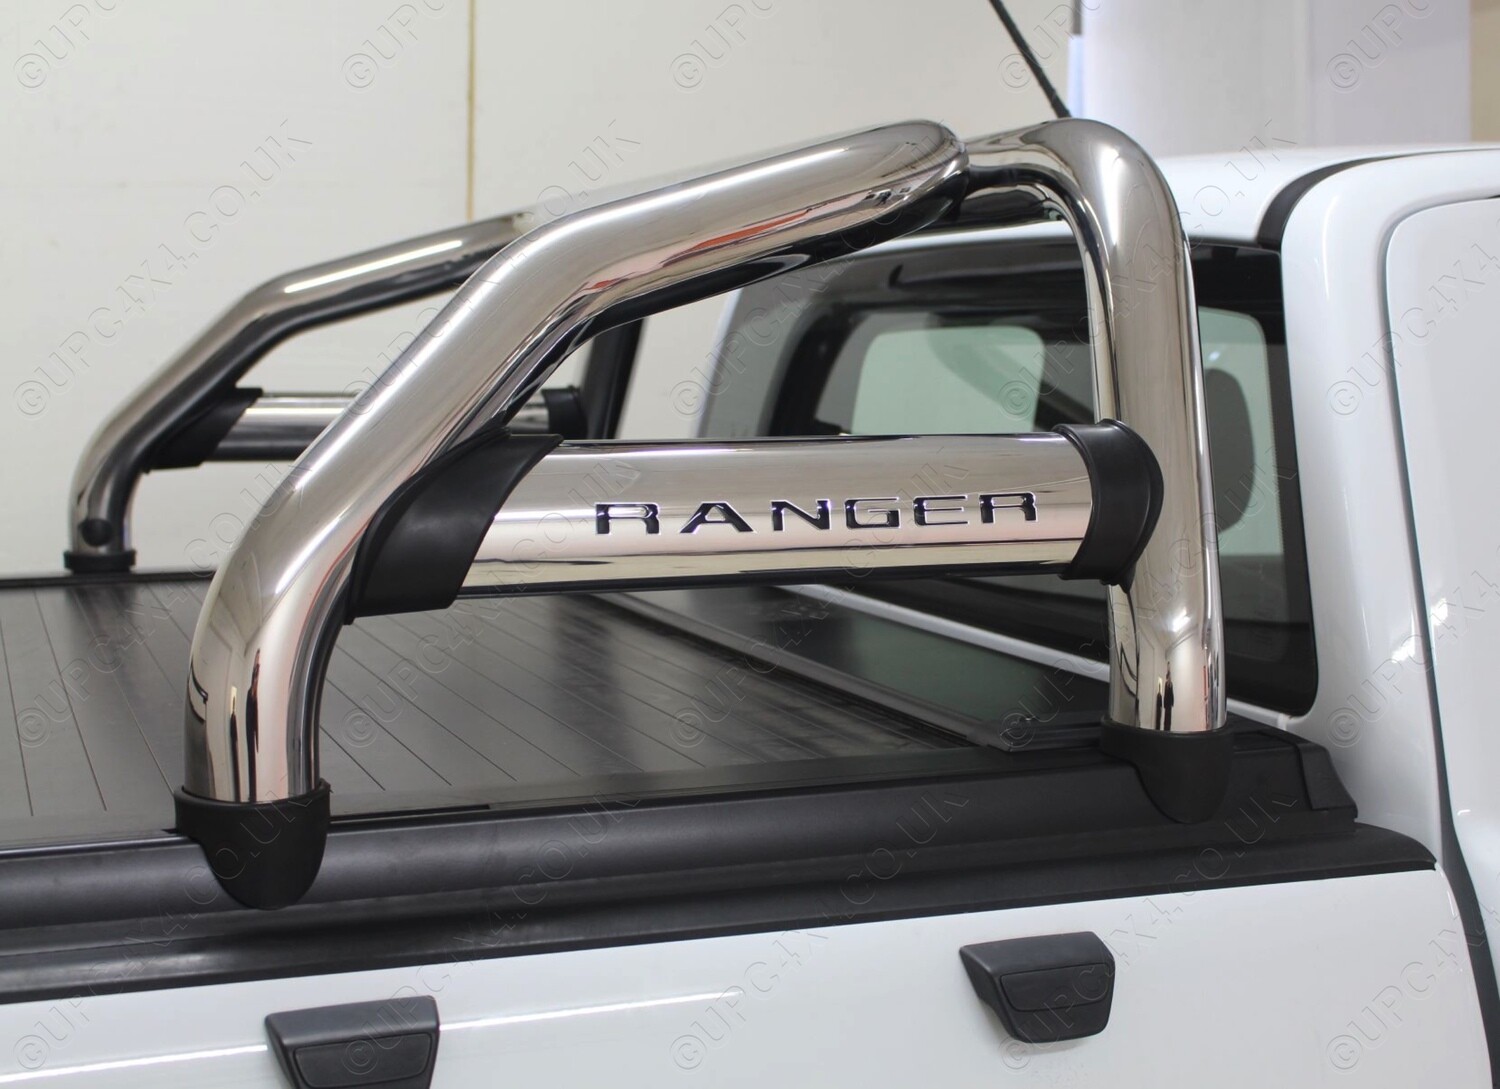 Securi-Lid Sports Bar in Polished Stainless Steel Ford Ranger